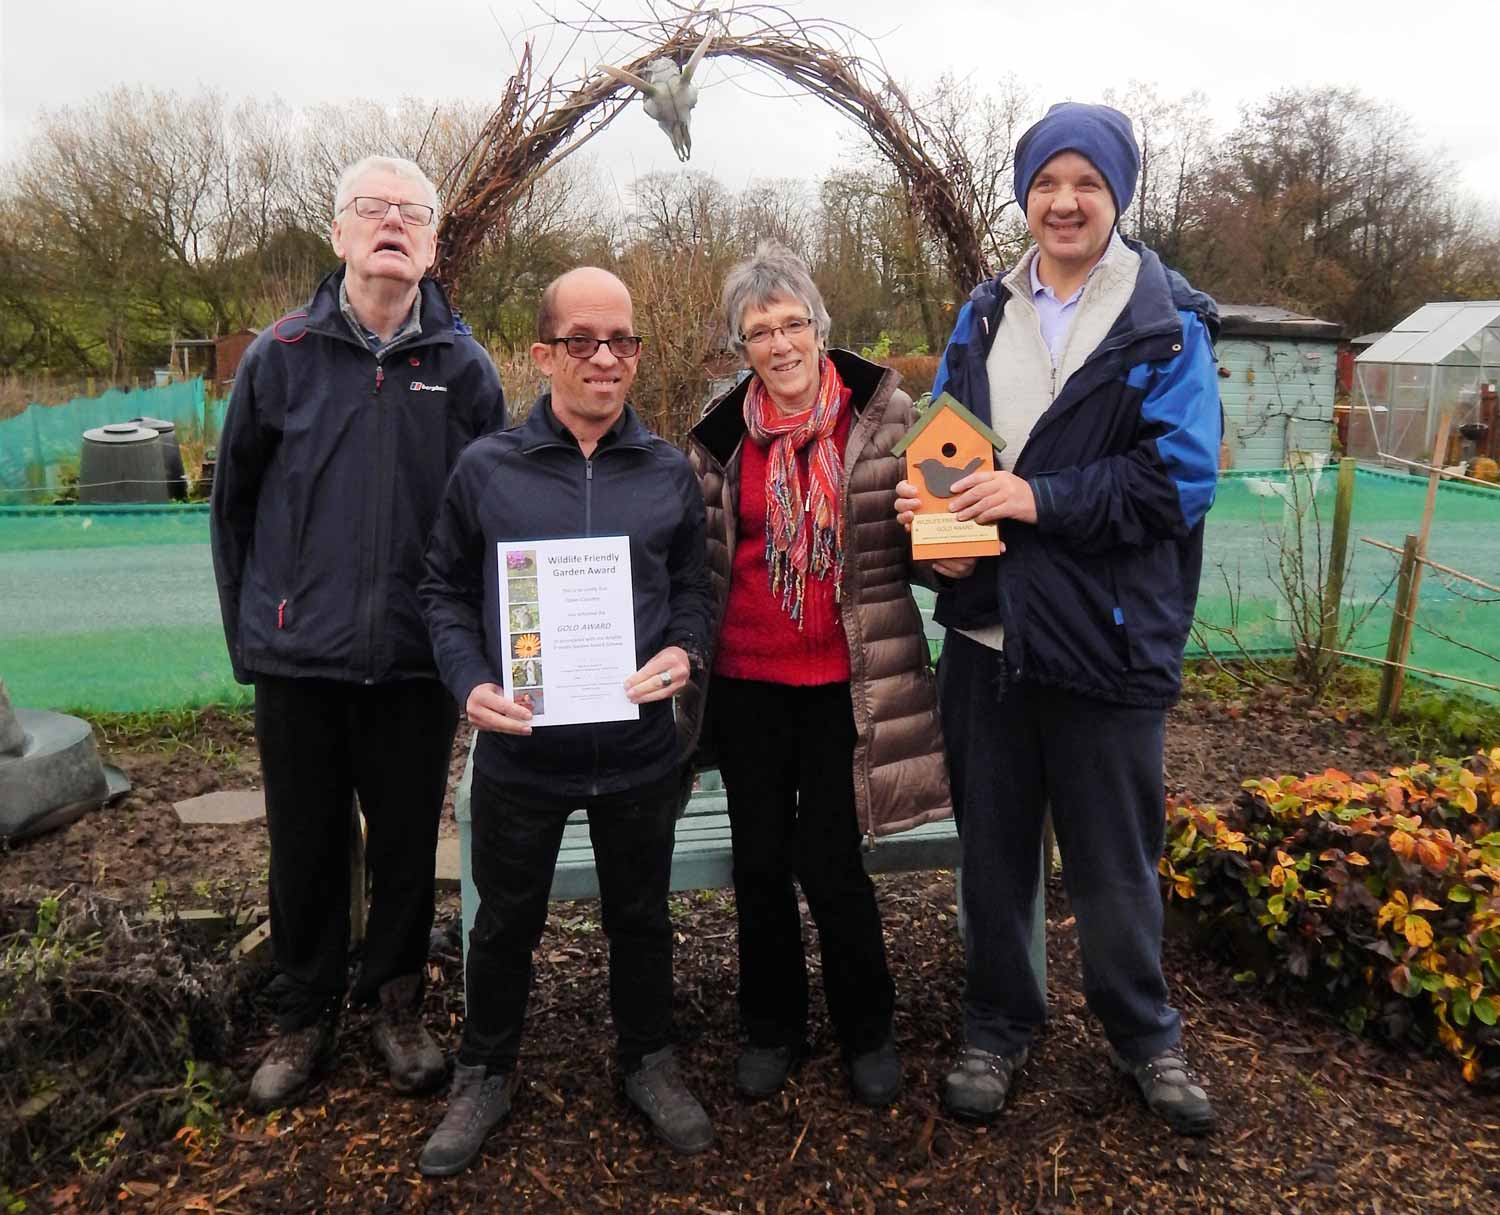 Members of Open Country receive their certificate and plaque from Pamela Millen, secretary of the Harrogate District Biodiversity Action Group